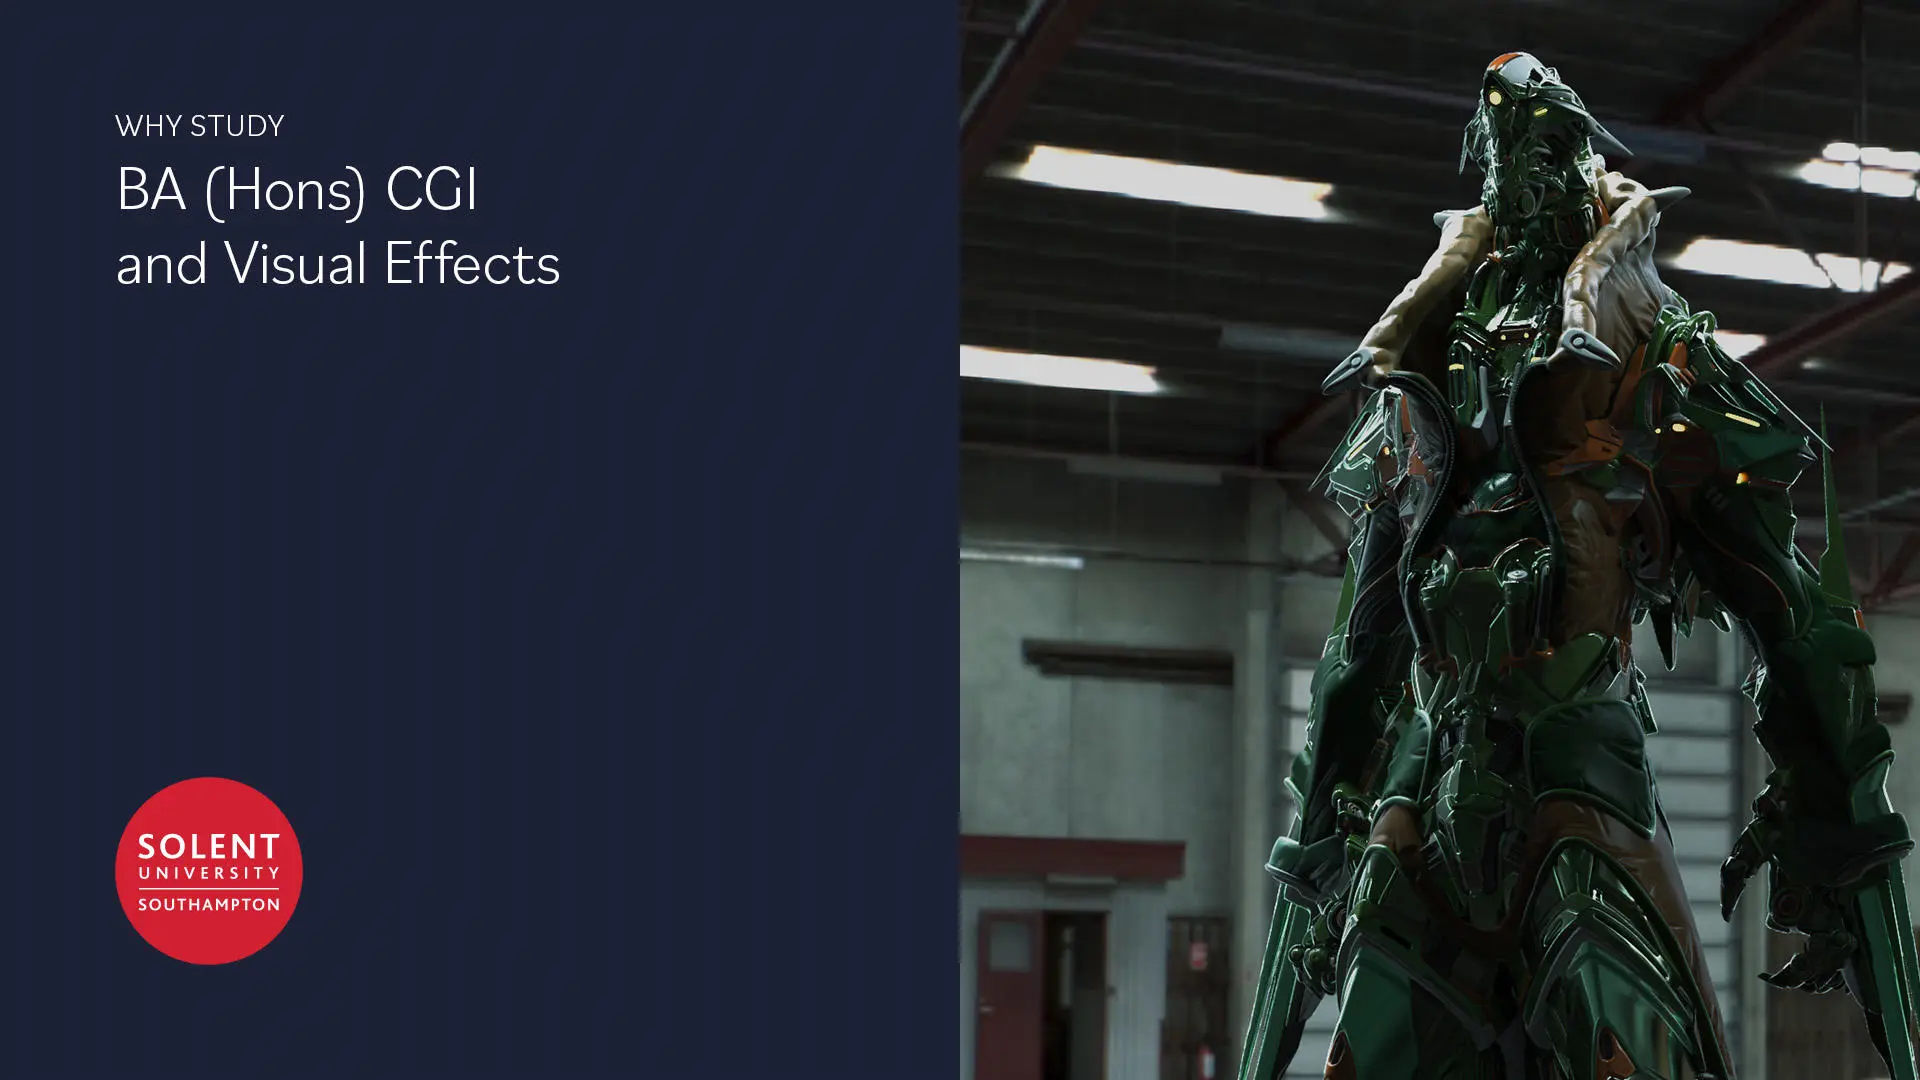 Image reads Why study BA (Hons) CGI and Visual Effects